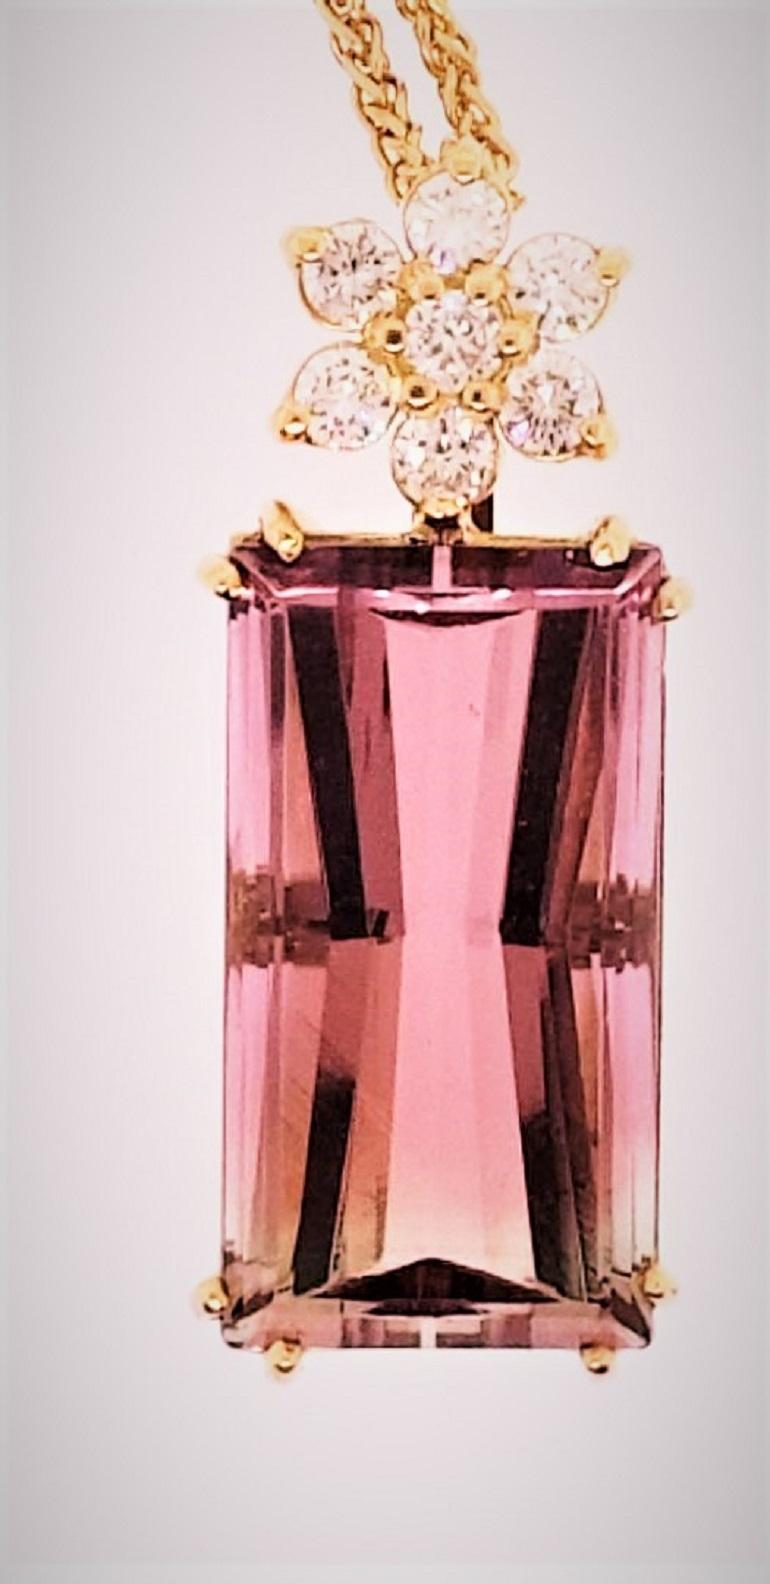 This amazing and brilliant Bi-Color Tourmaline weighing 22.46 carats, sits in an 18 Karat yellow gold basket setting with a diamond flower containing 7 diamonds that weigh 0.59 carats.  The beauty of the stone is not only in the cut, but the fact